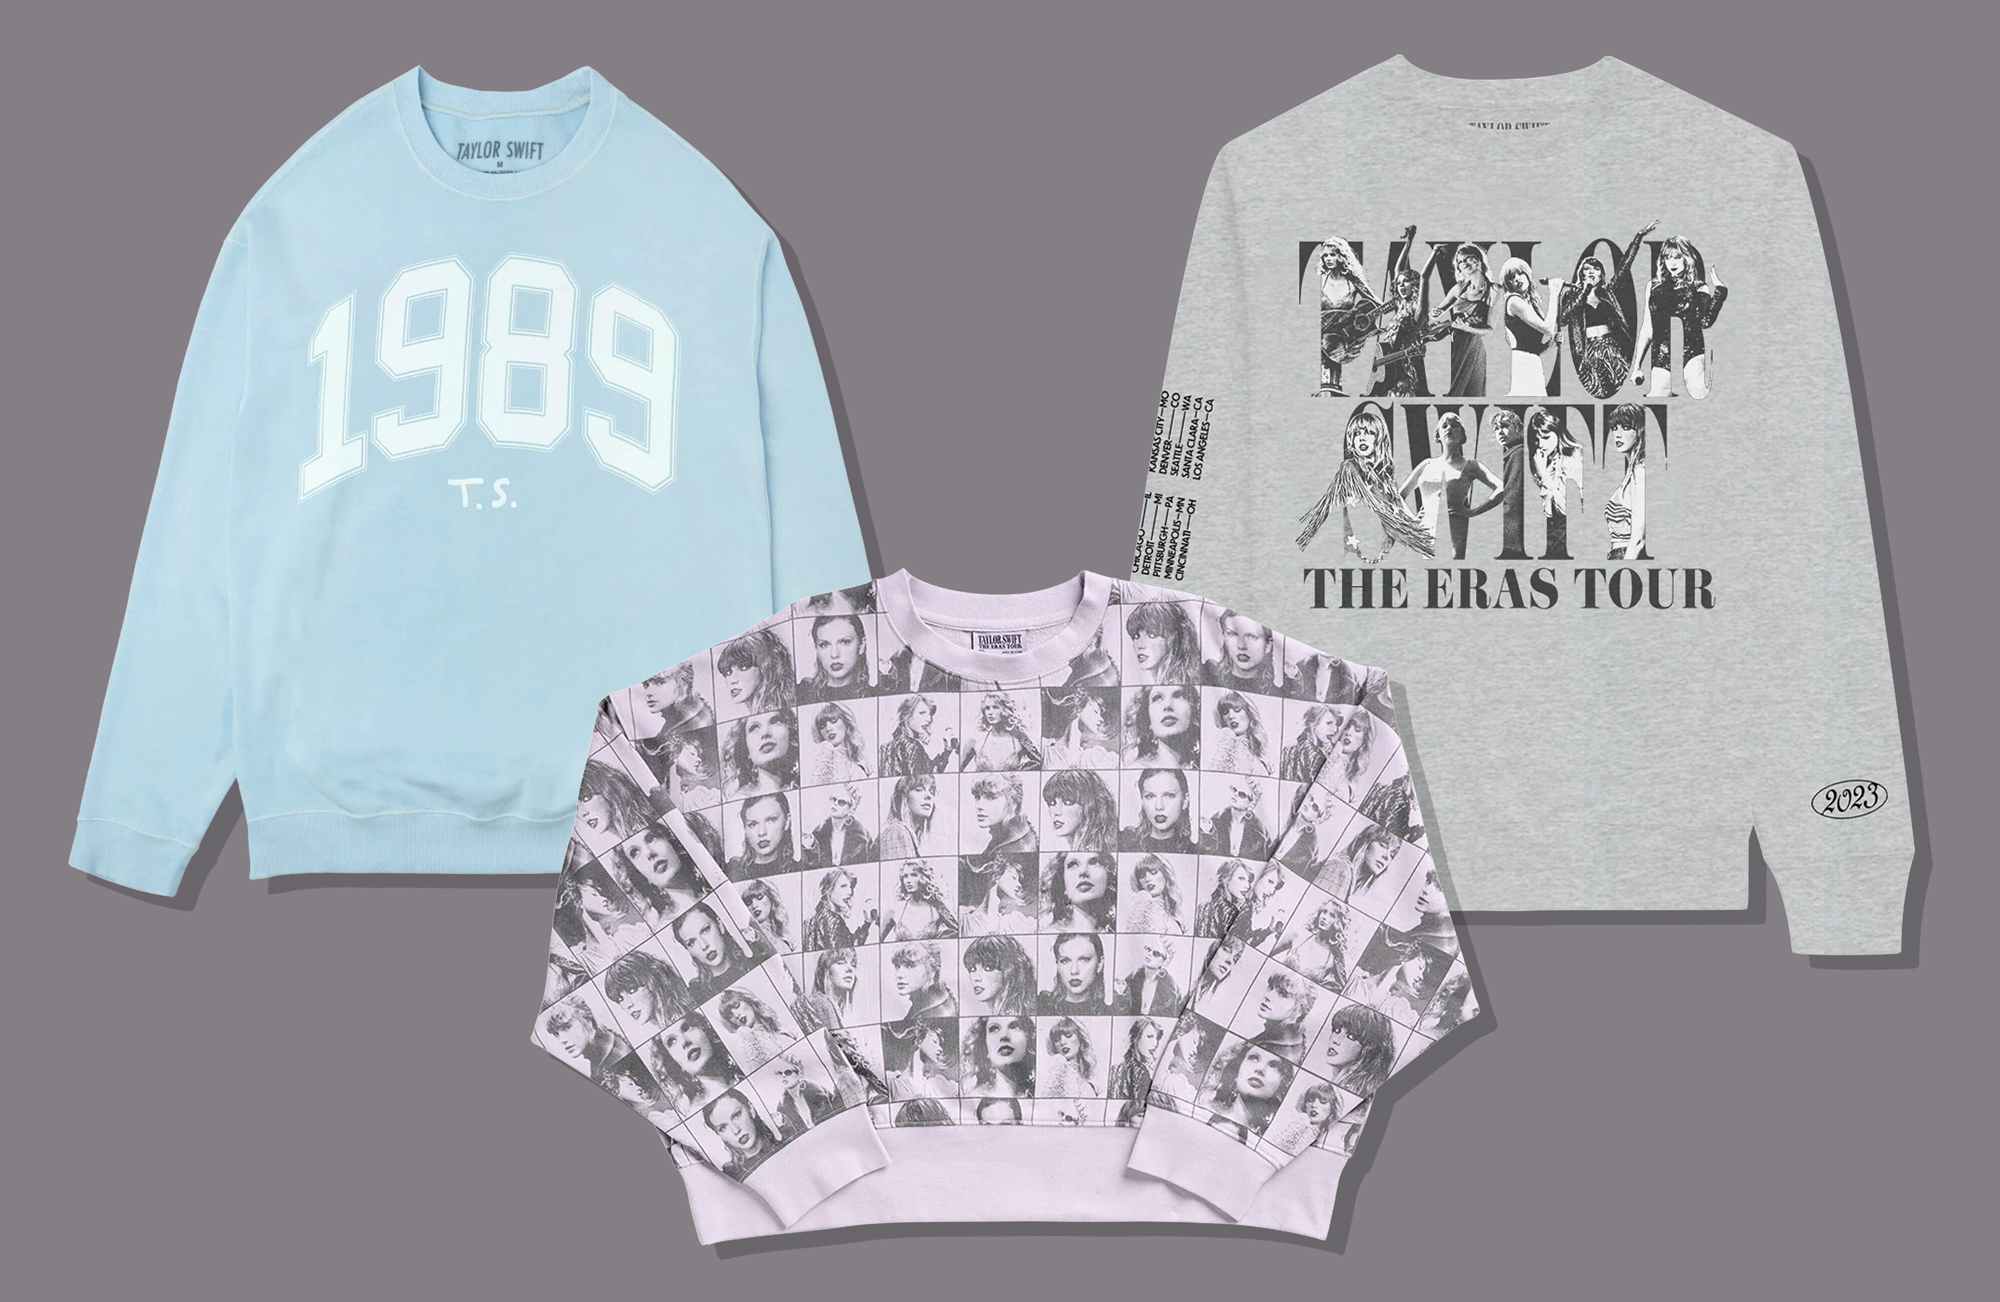 Want Taylor Swift Eras Tour merch? How to get great finds